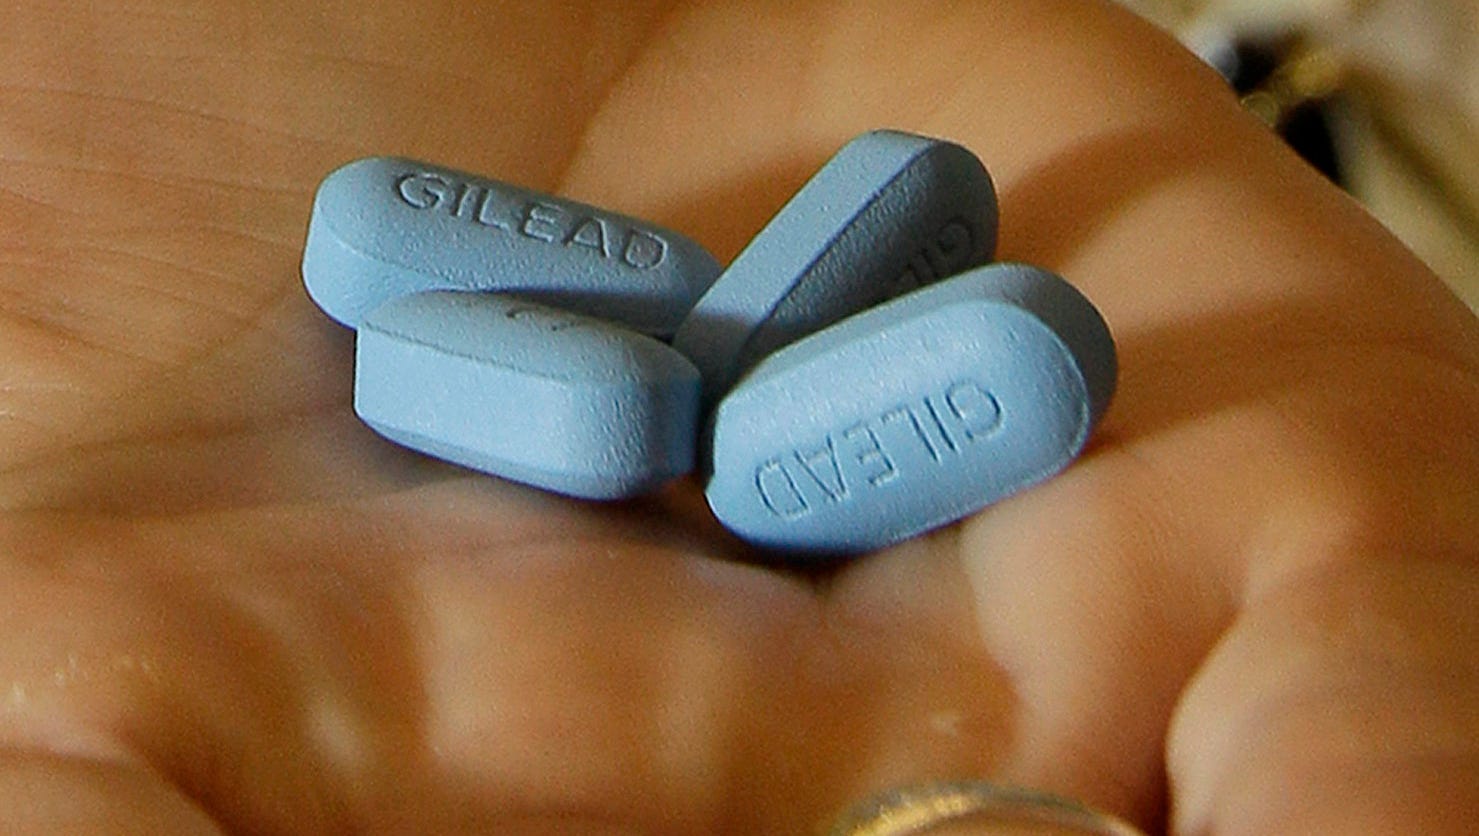 A Daily Pill Can Prevent Hiv Infection But Few Take It 7765